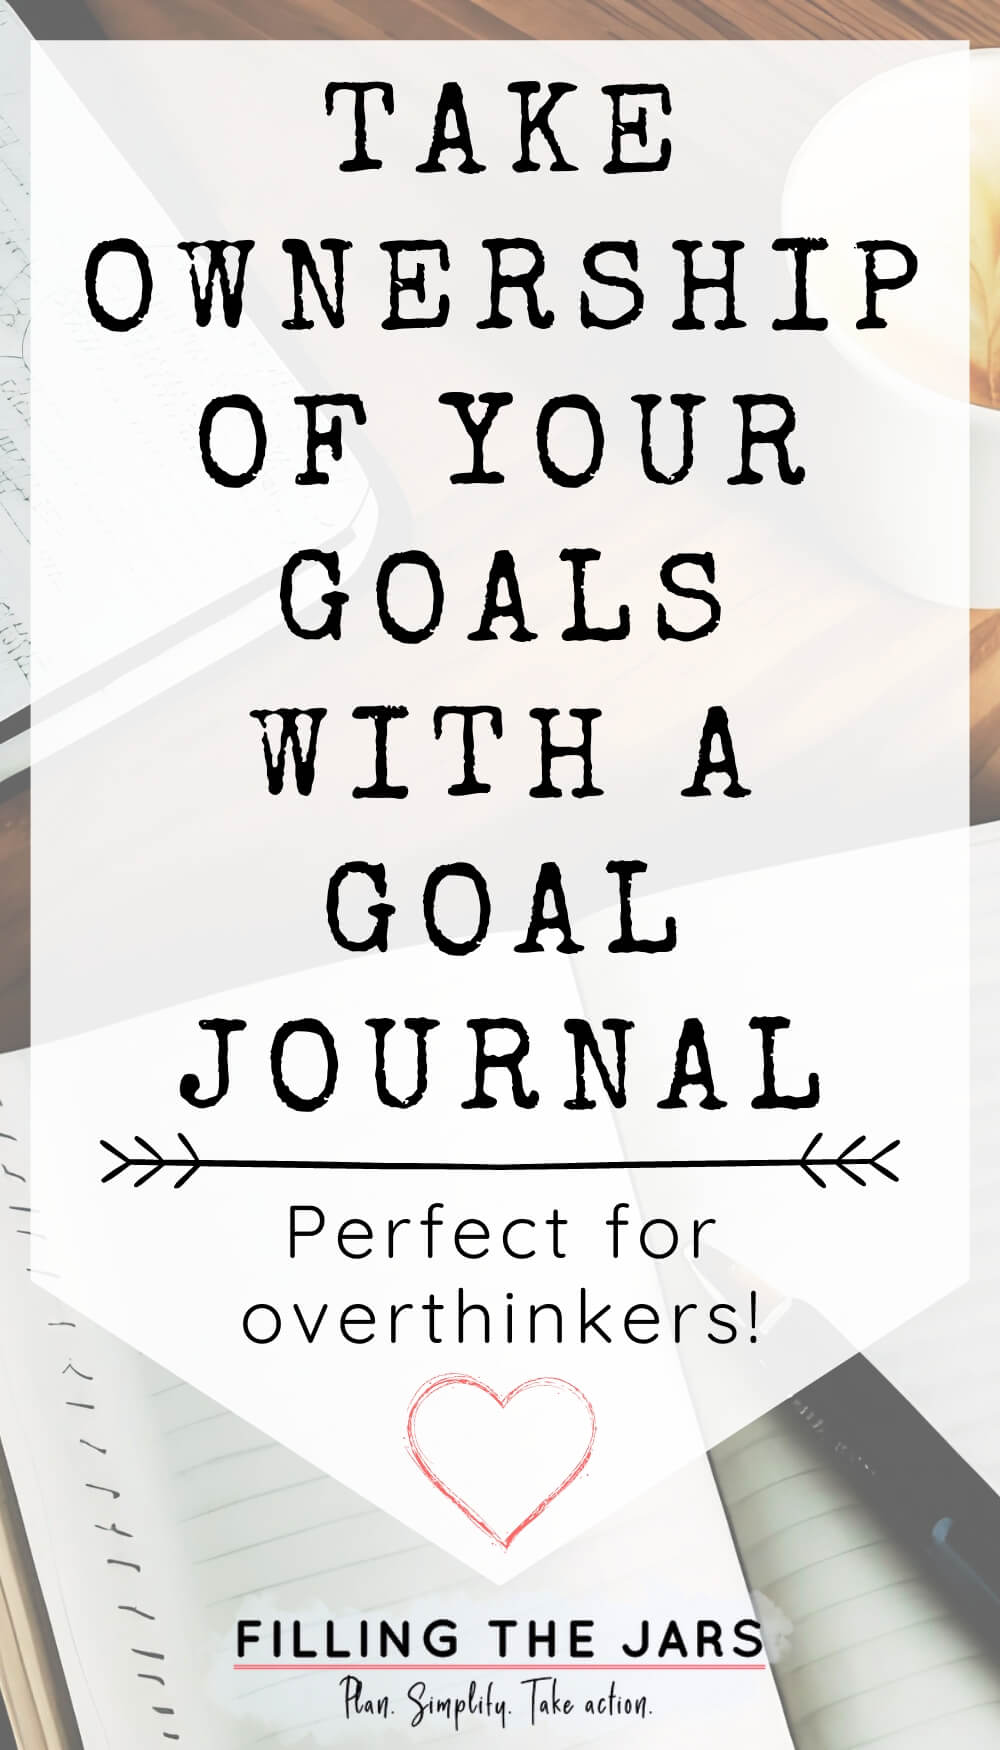 Text take ownership of your goals with a goal journal on white background over faded image of open journals and coffee cup on wood table.